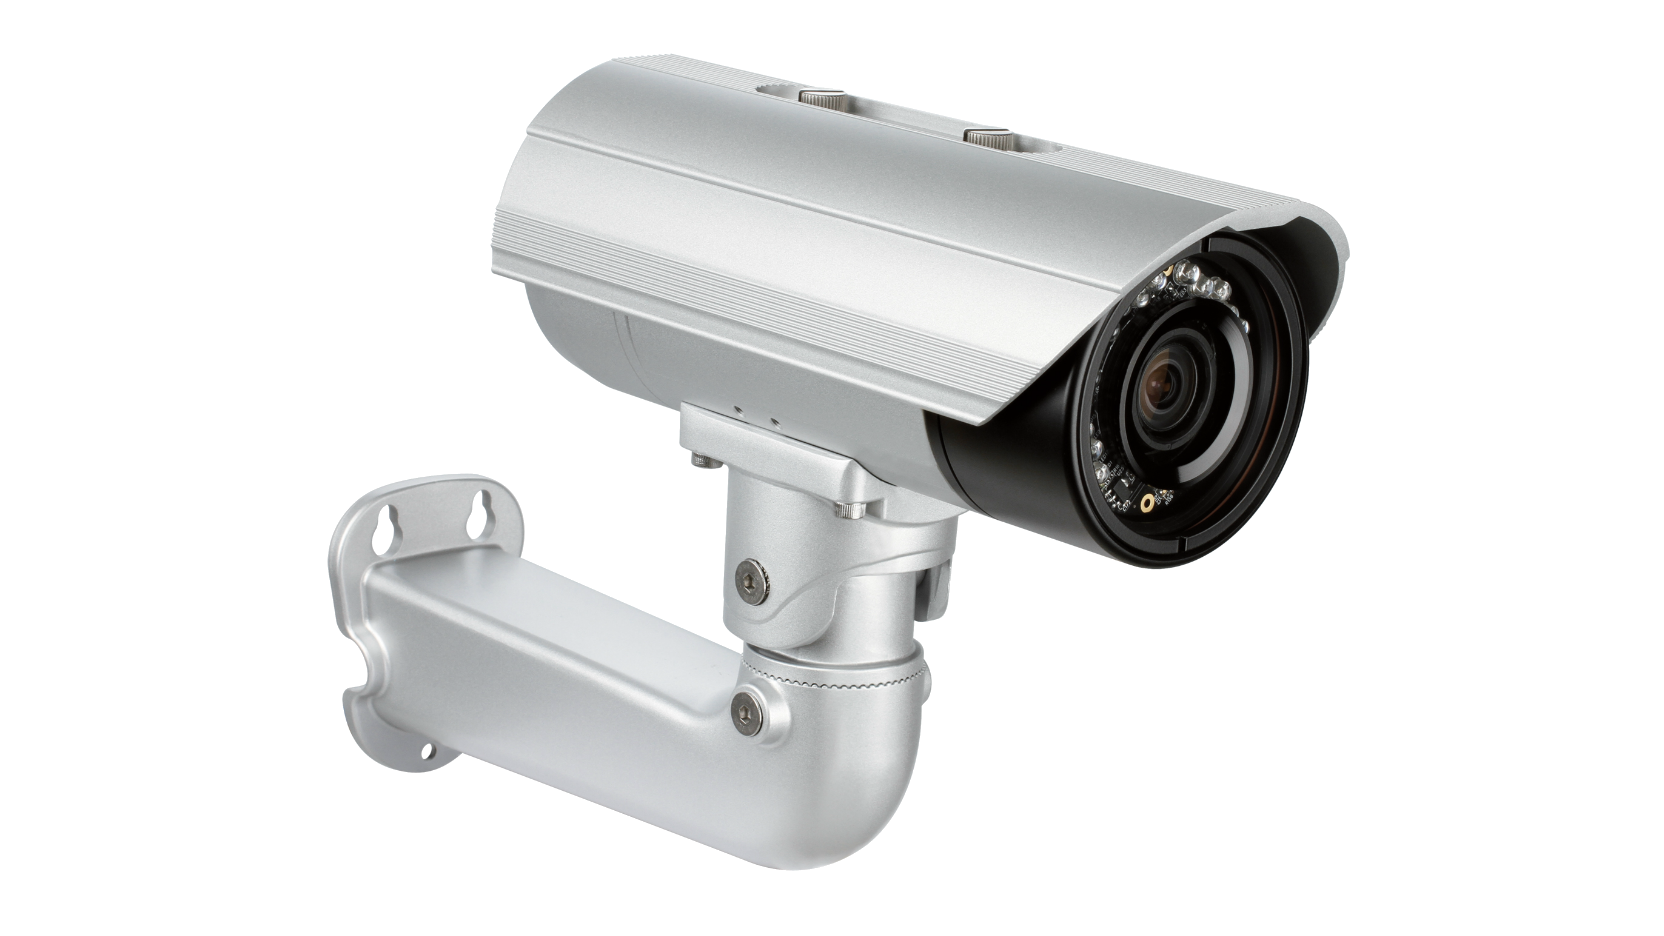 DCS-2210L - D-Link F/1.8 120/230V 3.5W HD PoE Network Surveillance Camera Day and Night